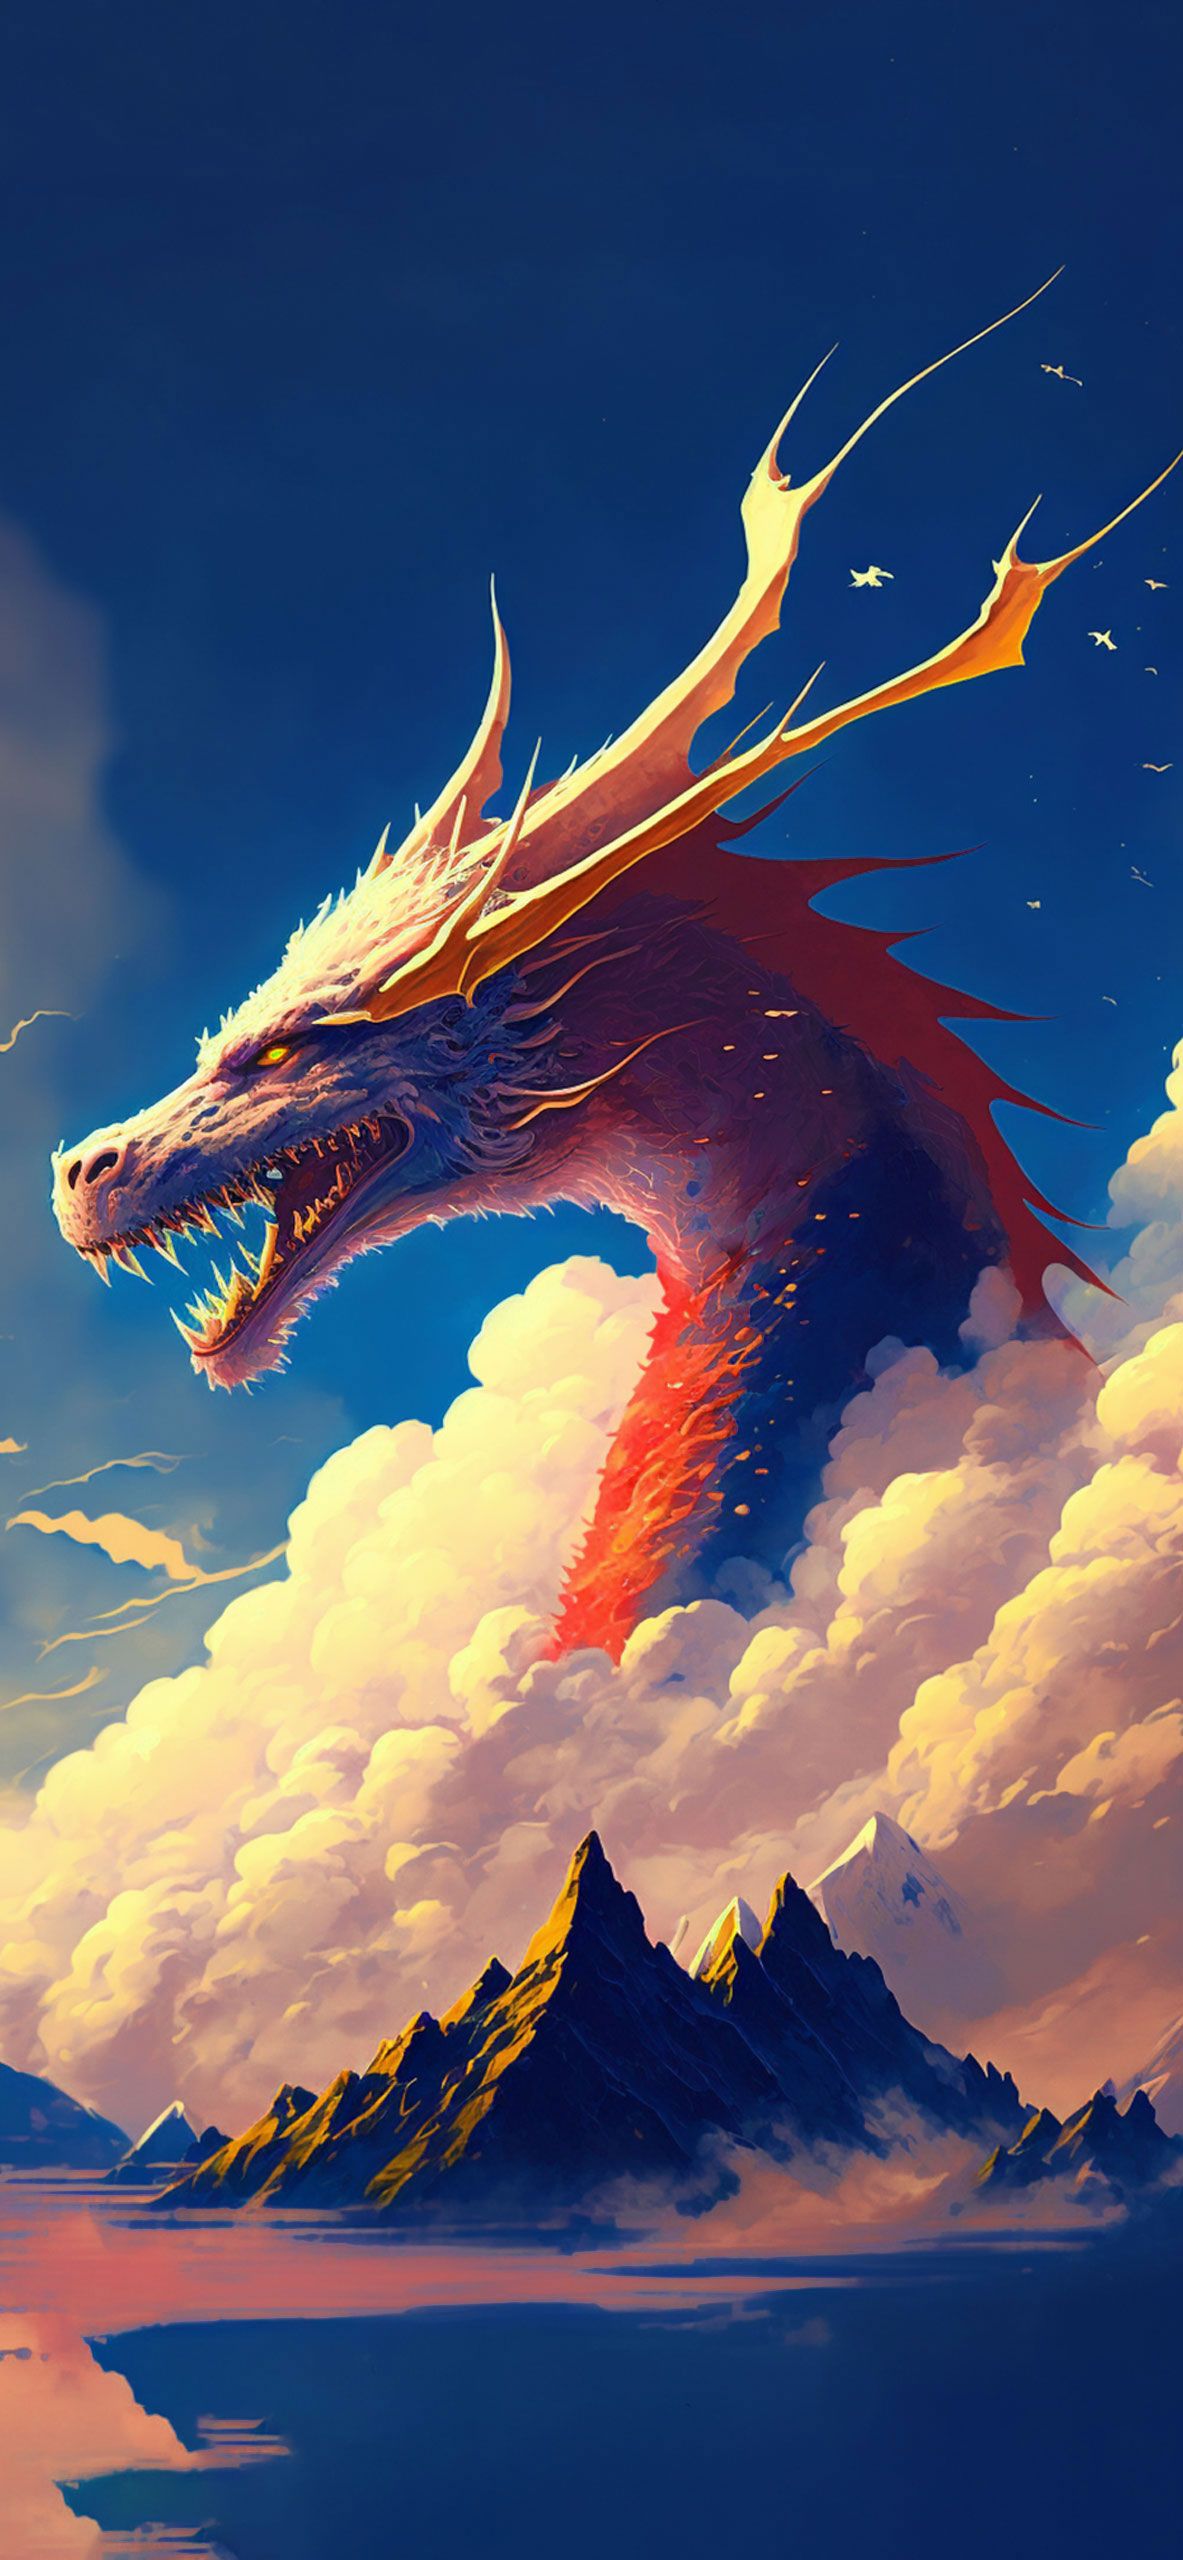 A large dragon flying over the clouds - Japan, dragon, Japanese